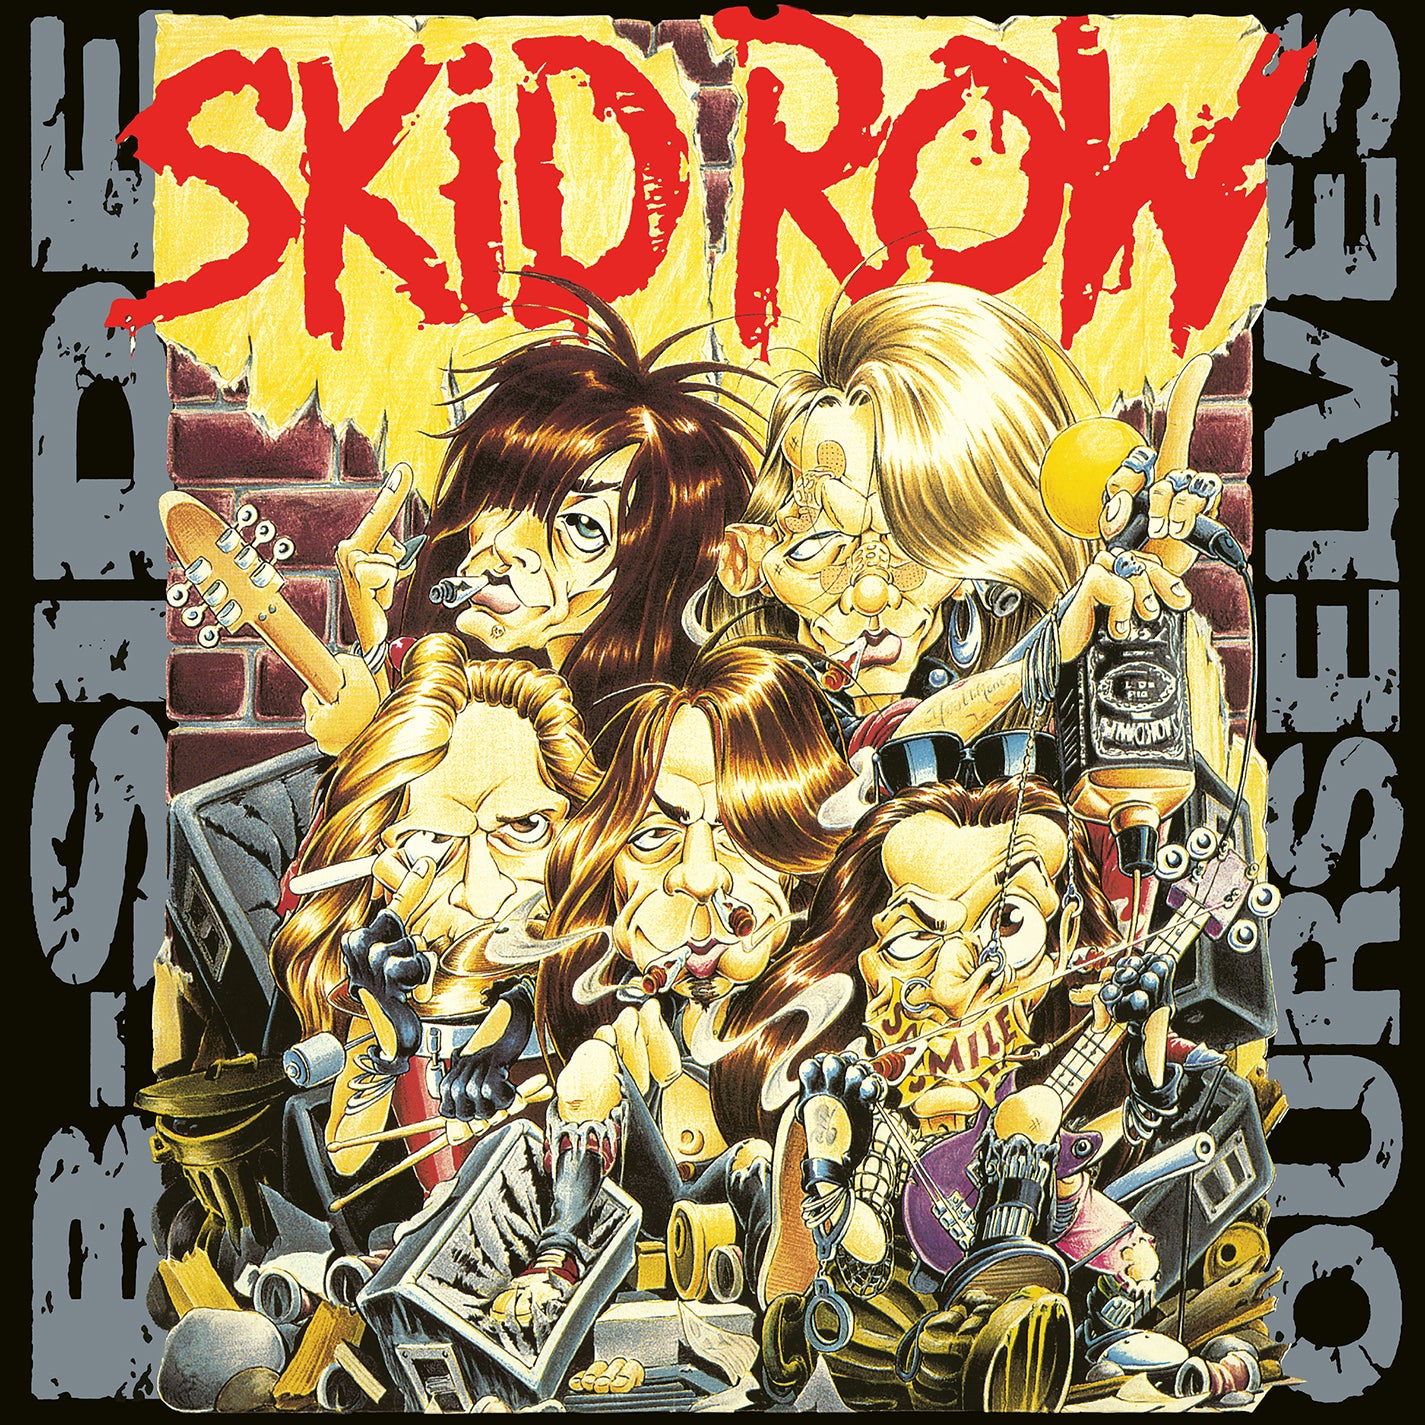 Skid Row - B-side Ourselves [ROCKtober 2017 Exclusive]